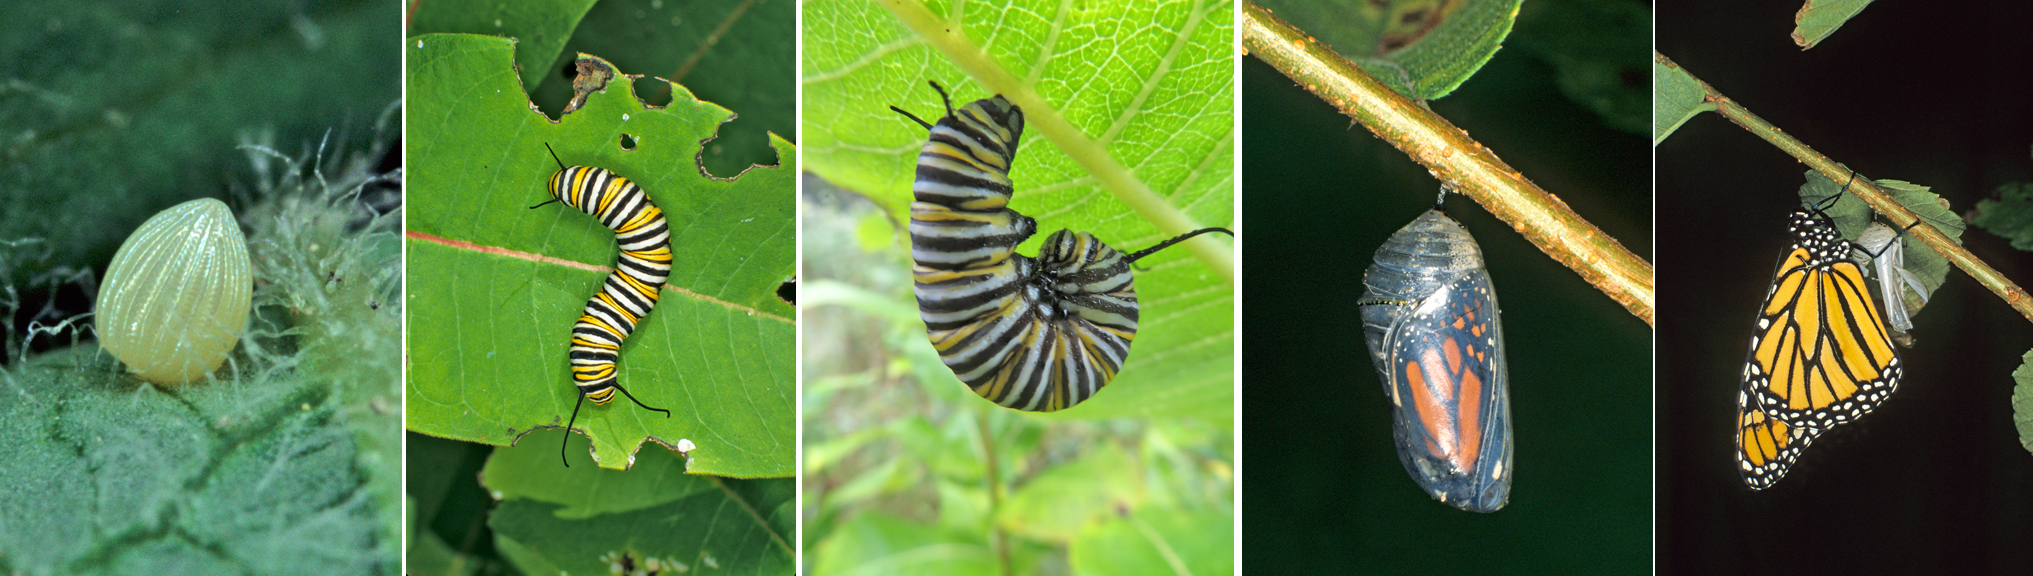 monarch life cycle